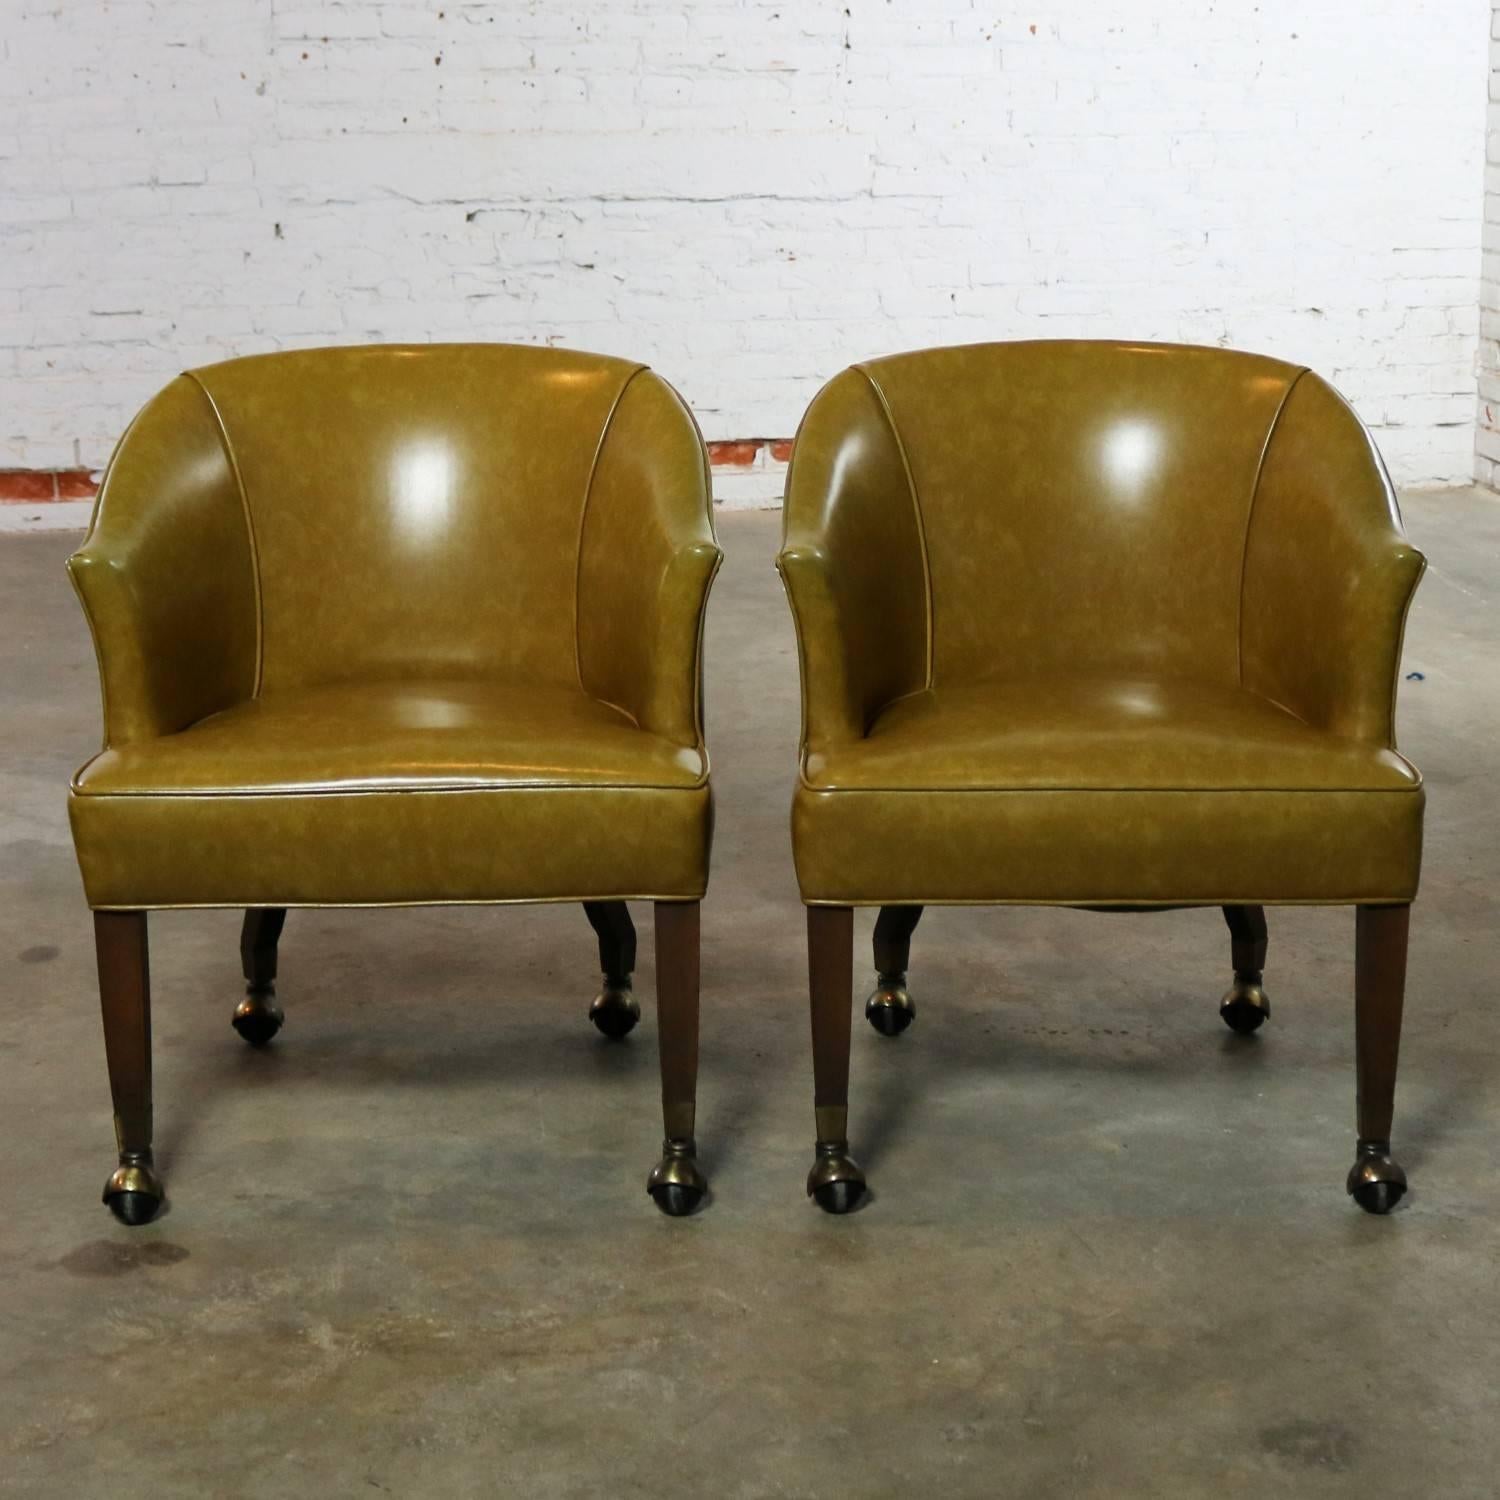 Handsome pair of midcentury rolling barrel shaped game chairs with olive or moss green vinyl Naugahyde and nail head accent. They are in wonderful vintage condition with normal age appropriate wear and tear apart from two small nicks in the vinyl